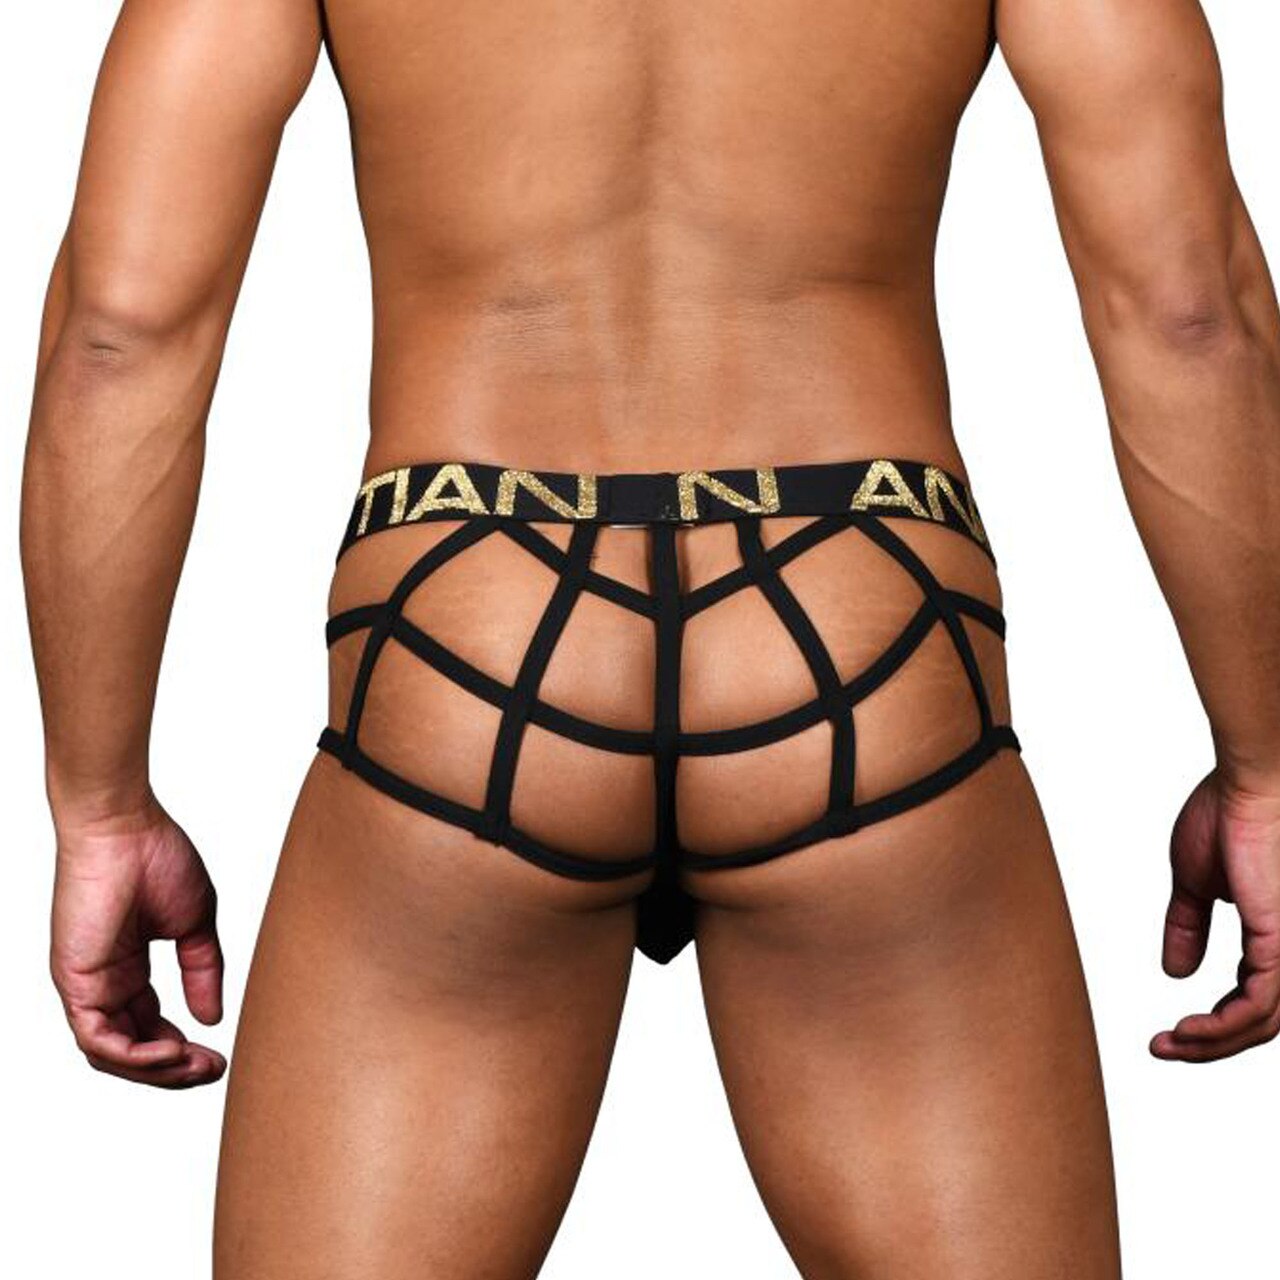 Mens Andrew Christian Lattice Lace Sheer Web Thong w/ Almost Naked